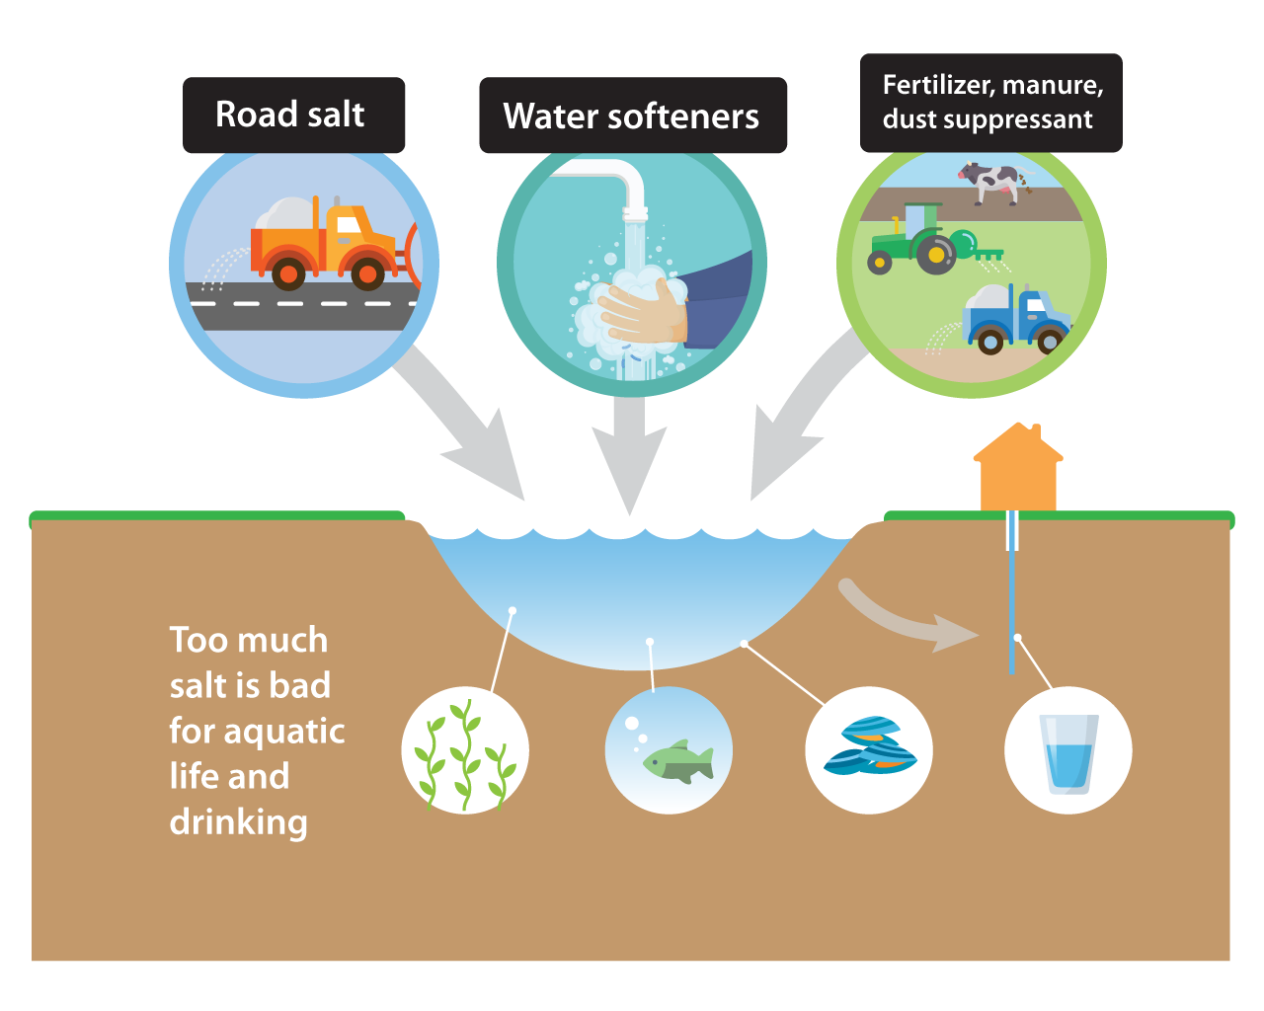 Road salt, water softeners, and fertilizer, manure, and dust suppressants all add salt to our water. Too much salt is bad for aquatic life like plants and fish, and is bad for drinking.